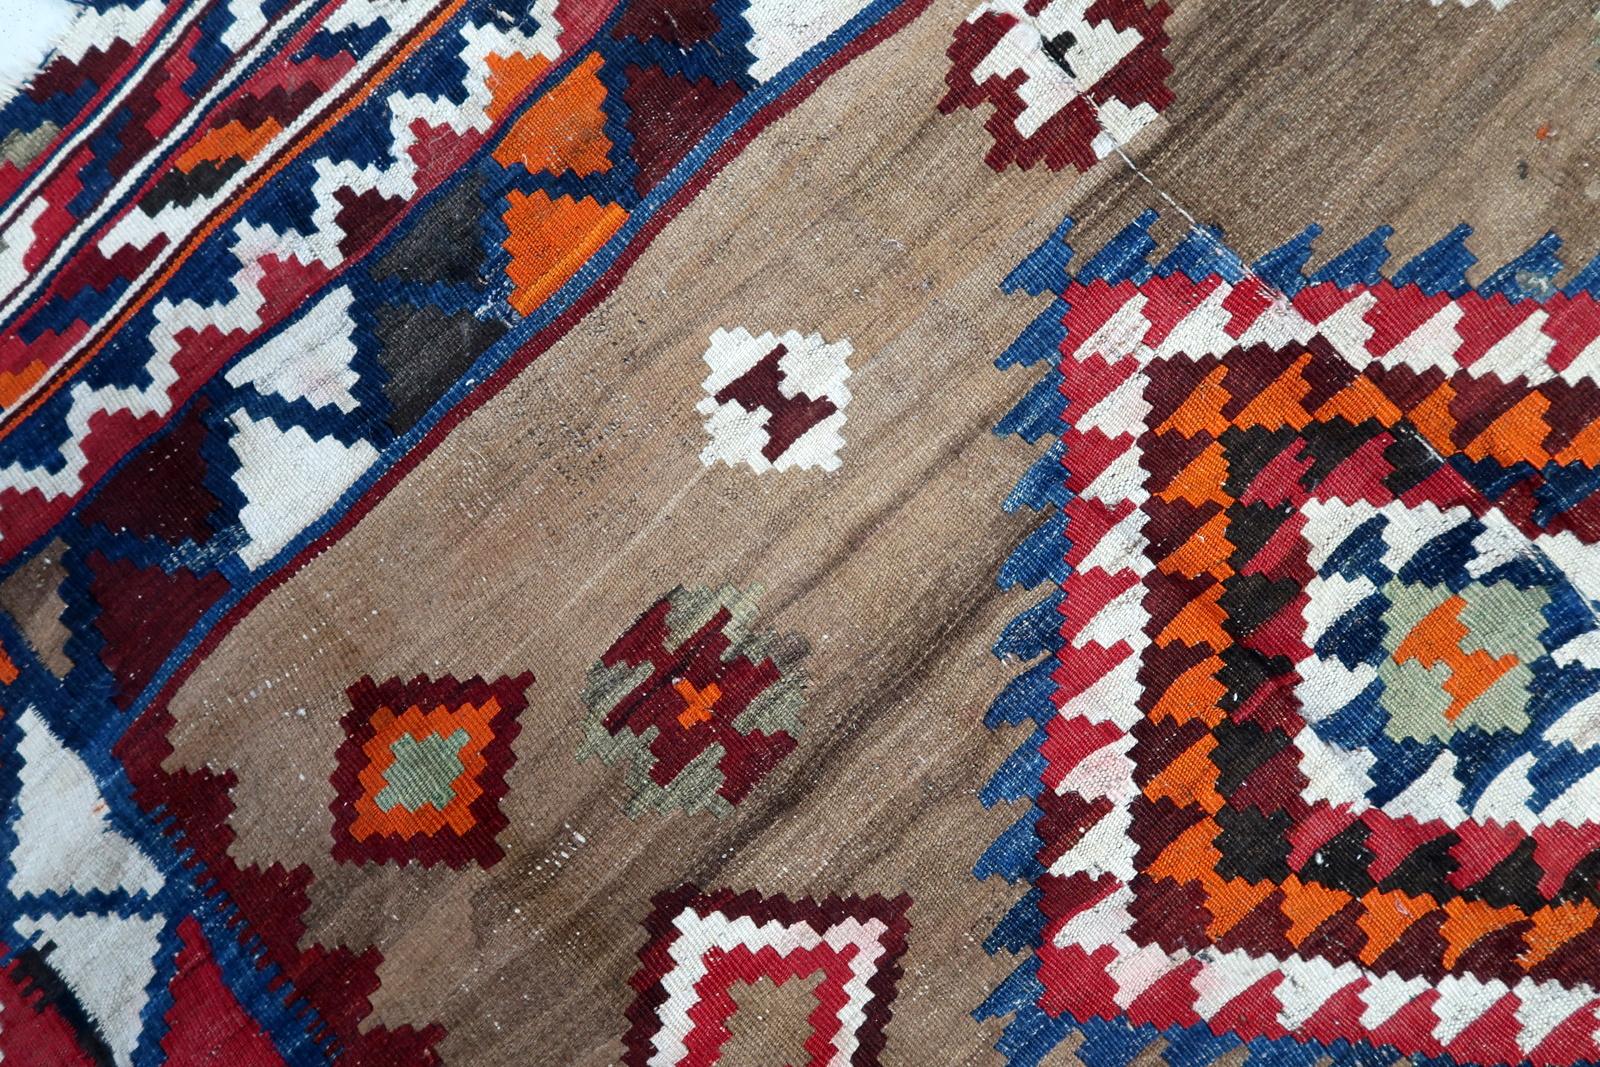 Handmade Antique Persian Ardabil Kilim Rug 4.5' x 6.5', 1930s - 1C1146 In Good Condition For Sale In Bordeaux, FR